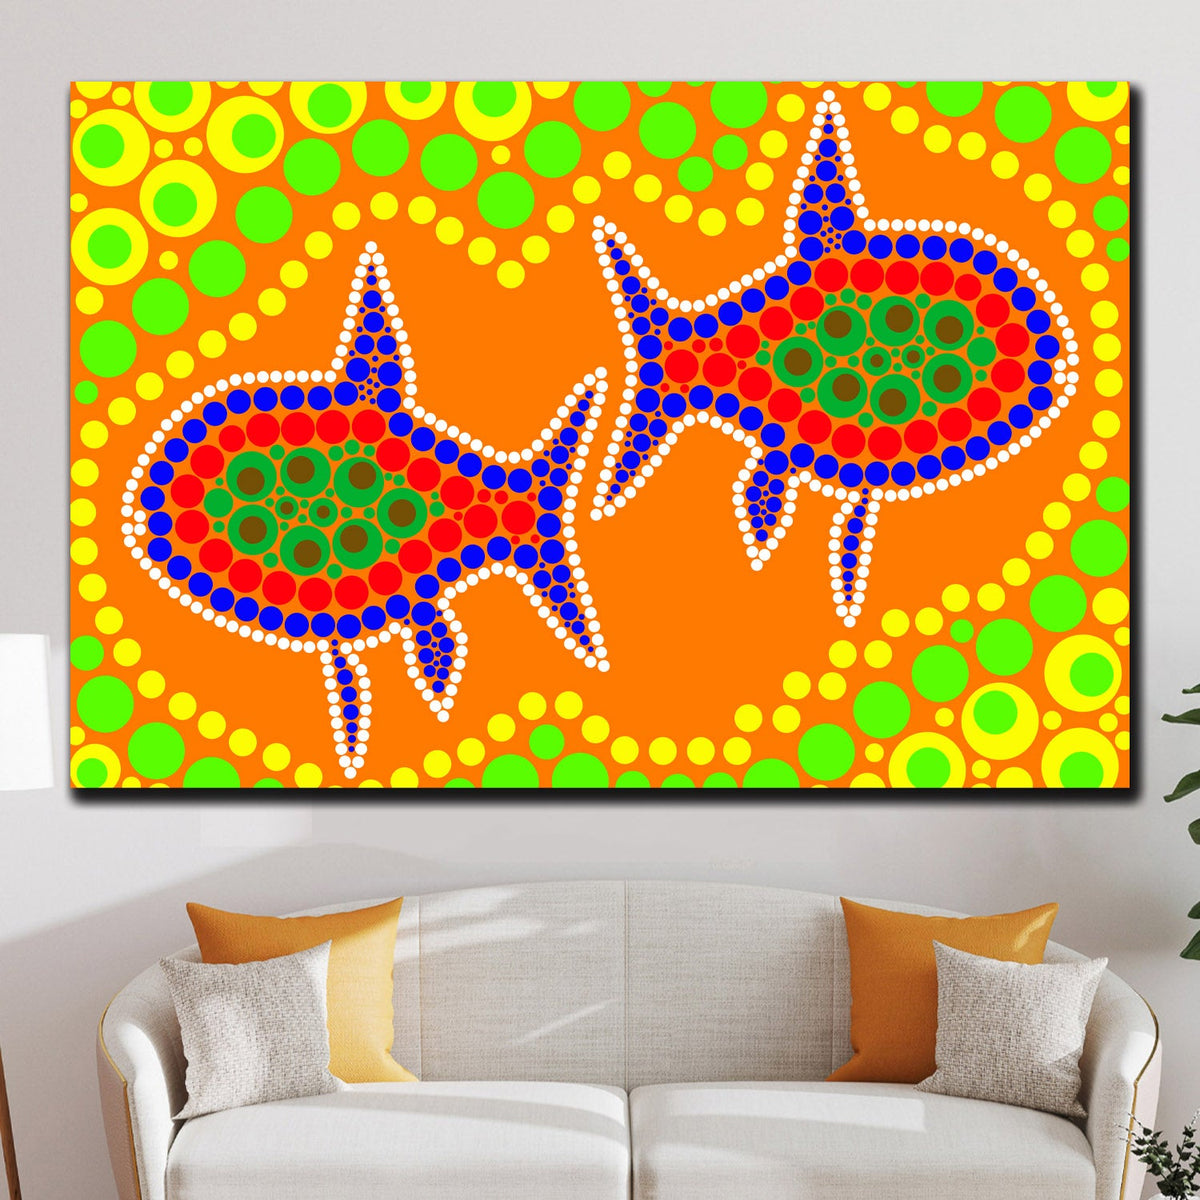 https://cdn.shopify.com/s/files/1/0387/9986/8044/products/ColourfulFishCanvasArtprintStretched-3.jpg